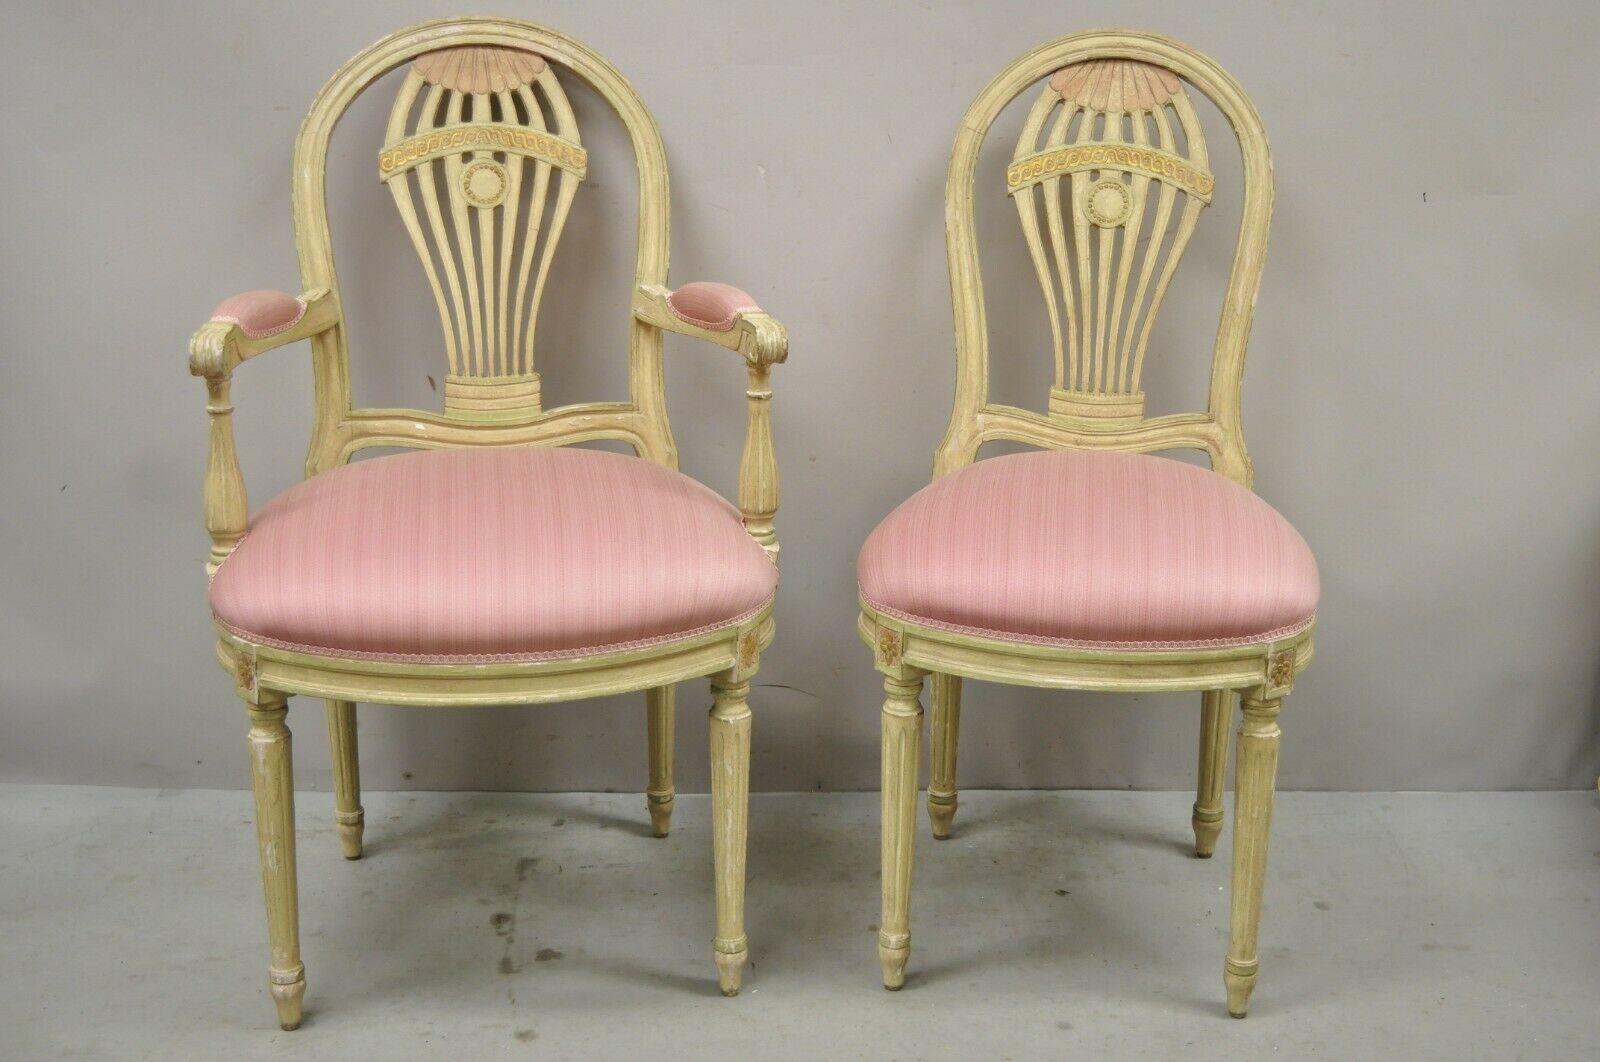 French Louis XVI Style Hot Air Balloon Back Distress Painted Italian dining chairs - Set of 8. Set includes (2) arm chairs, (6) side chairs, distressed cream painted finish, pink upholstered seats with pink painted details to frames, solid wood